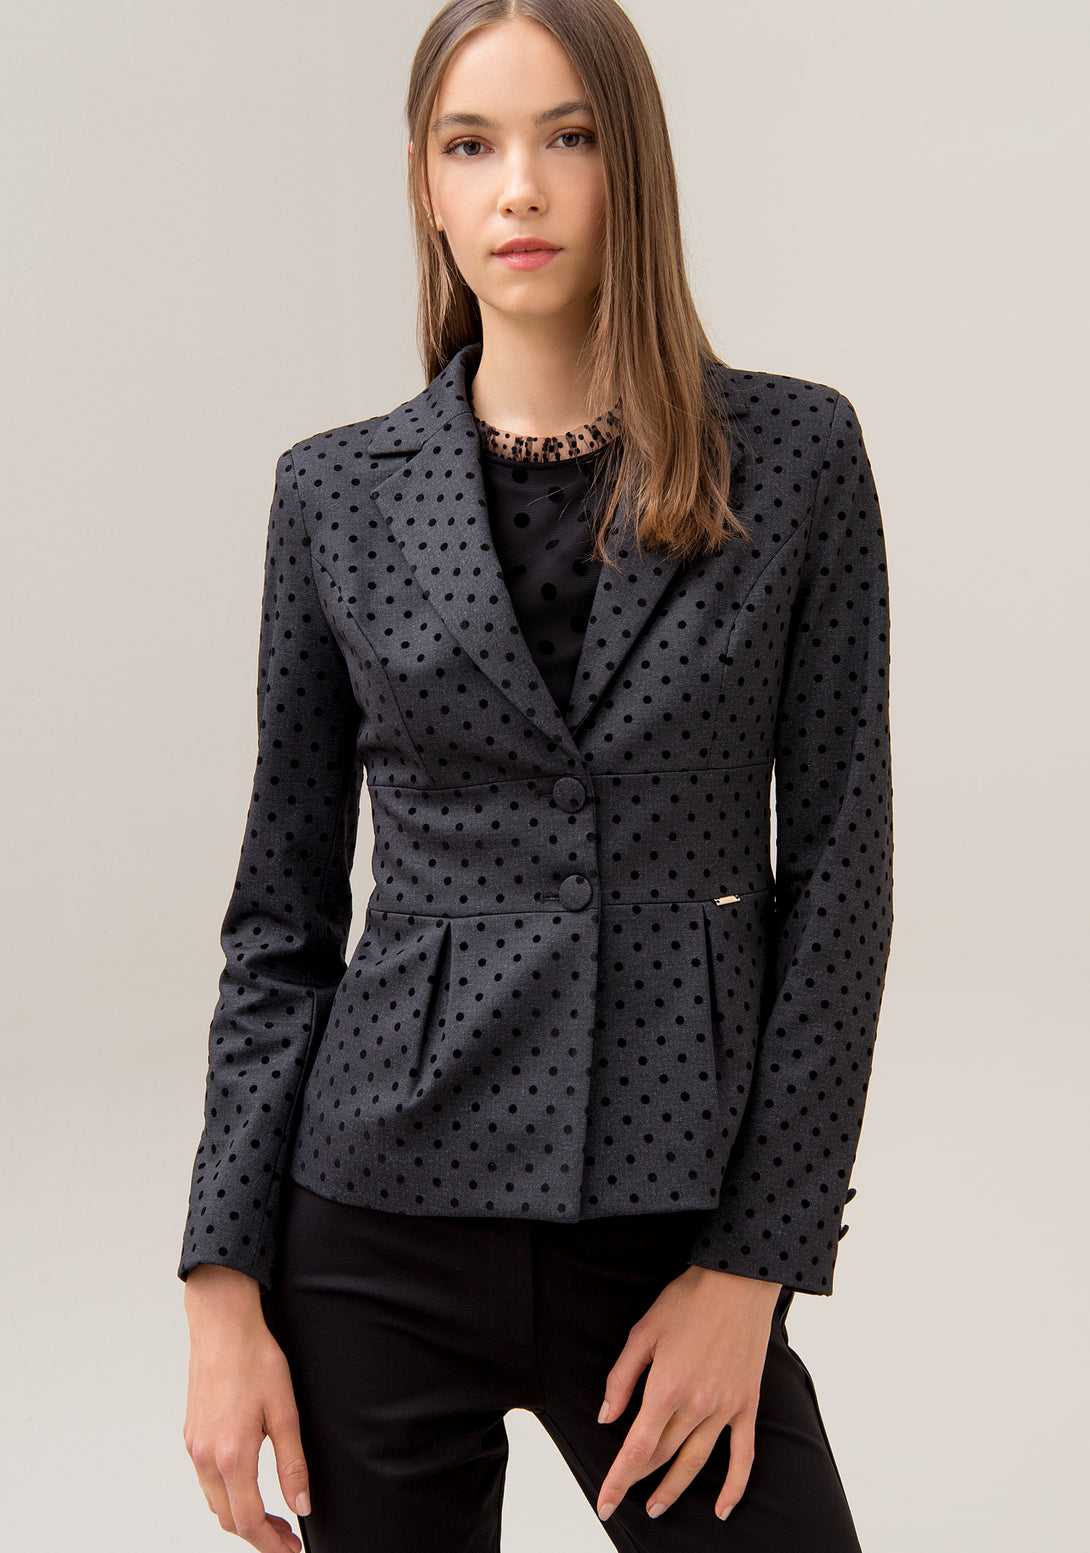 Blazer jacket regular fit made with stretch fabric and with polka dots pattern